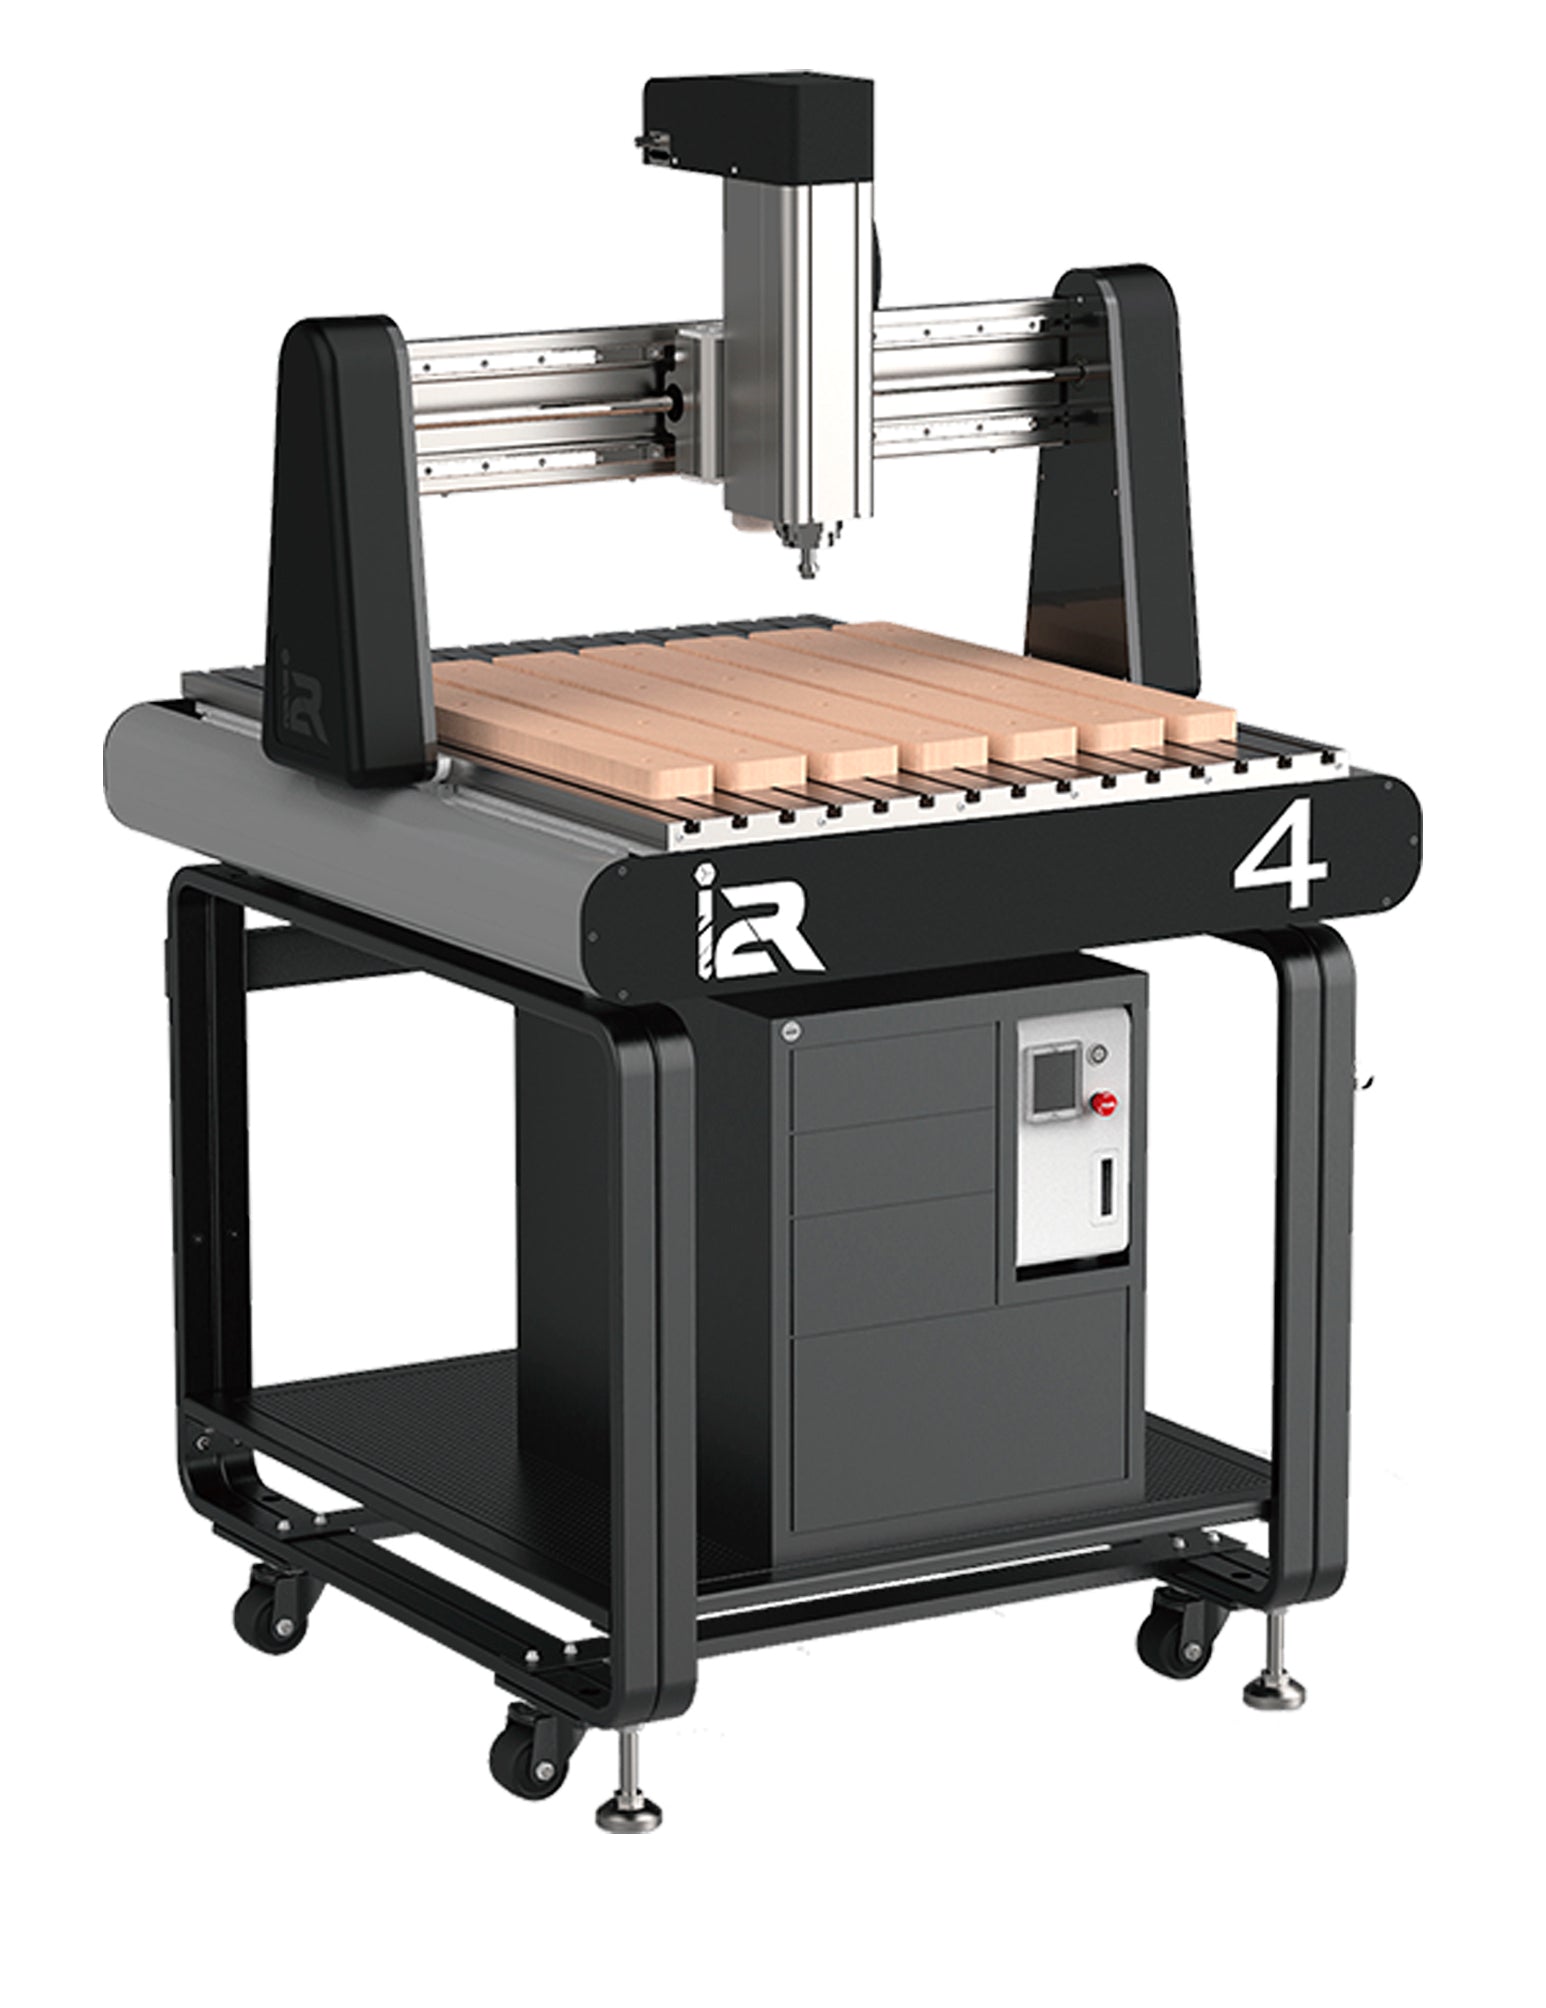 I2R 4 CNC - Ultimate 3D Printing Store